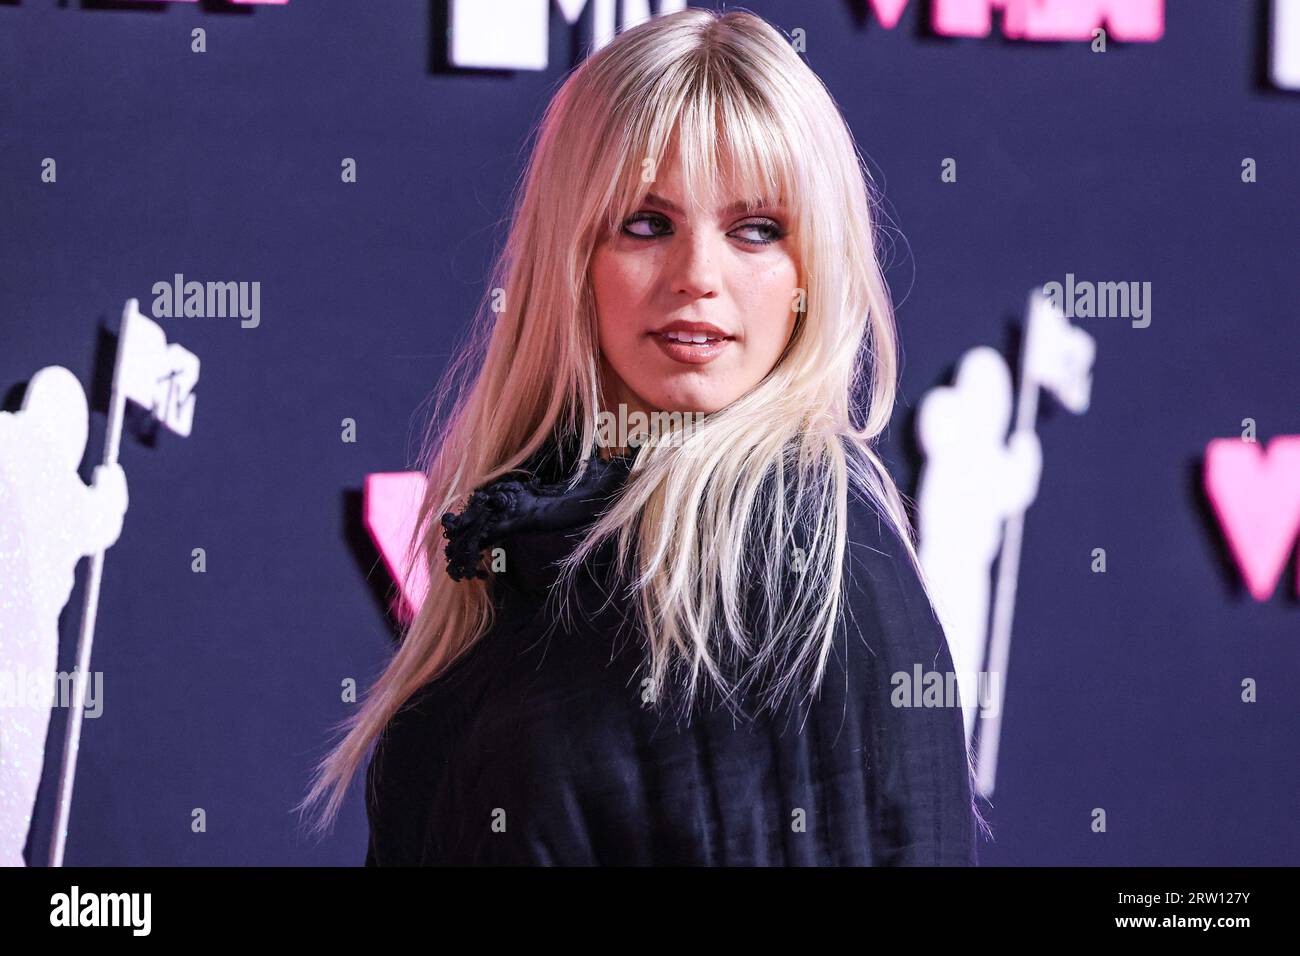 NEWARK, NEW JERSEY, USA - SEPTEMBER 12: Renee Rapp arrives at the 2023 MTV Video Music Awards held at the Prudential Center on September 12, 2023 in Newark, New Jersey, United States. (Photo by Xavier Collin/Image Press Agency) Stock Photo